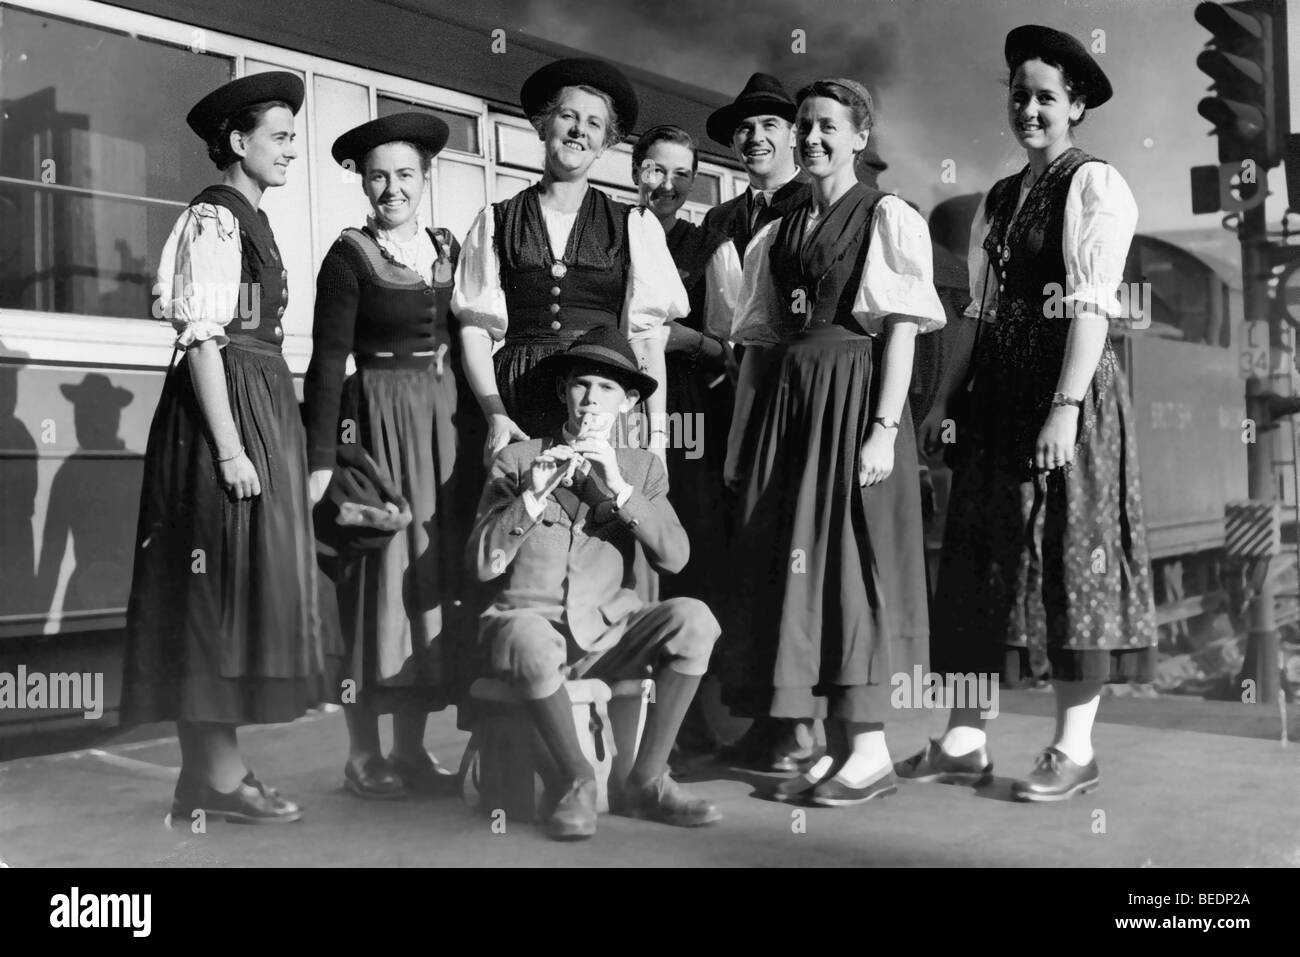 Oct 05, 1950; Liverpool, London; Baroness MARIA AUGUSTA VON TRAPP and the Trapp Family Singers, wearing their national Austrian Stock Photo